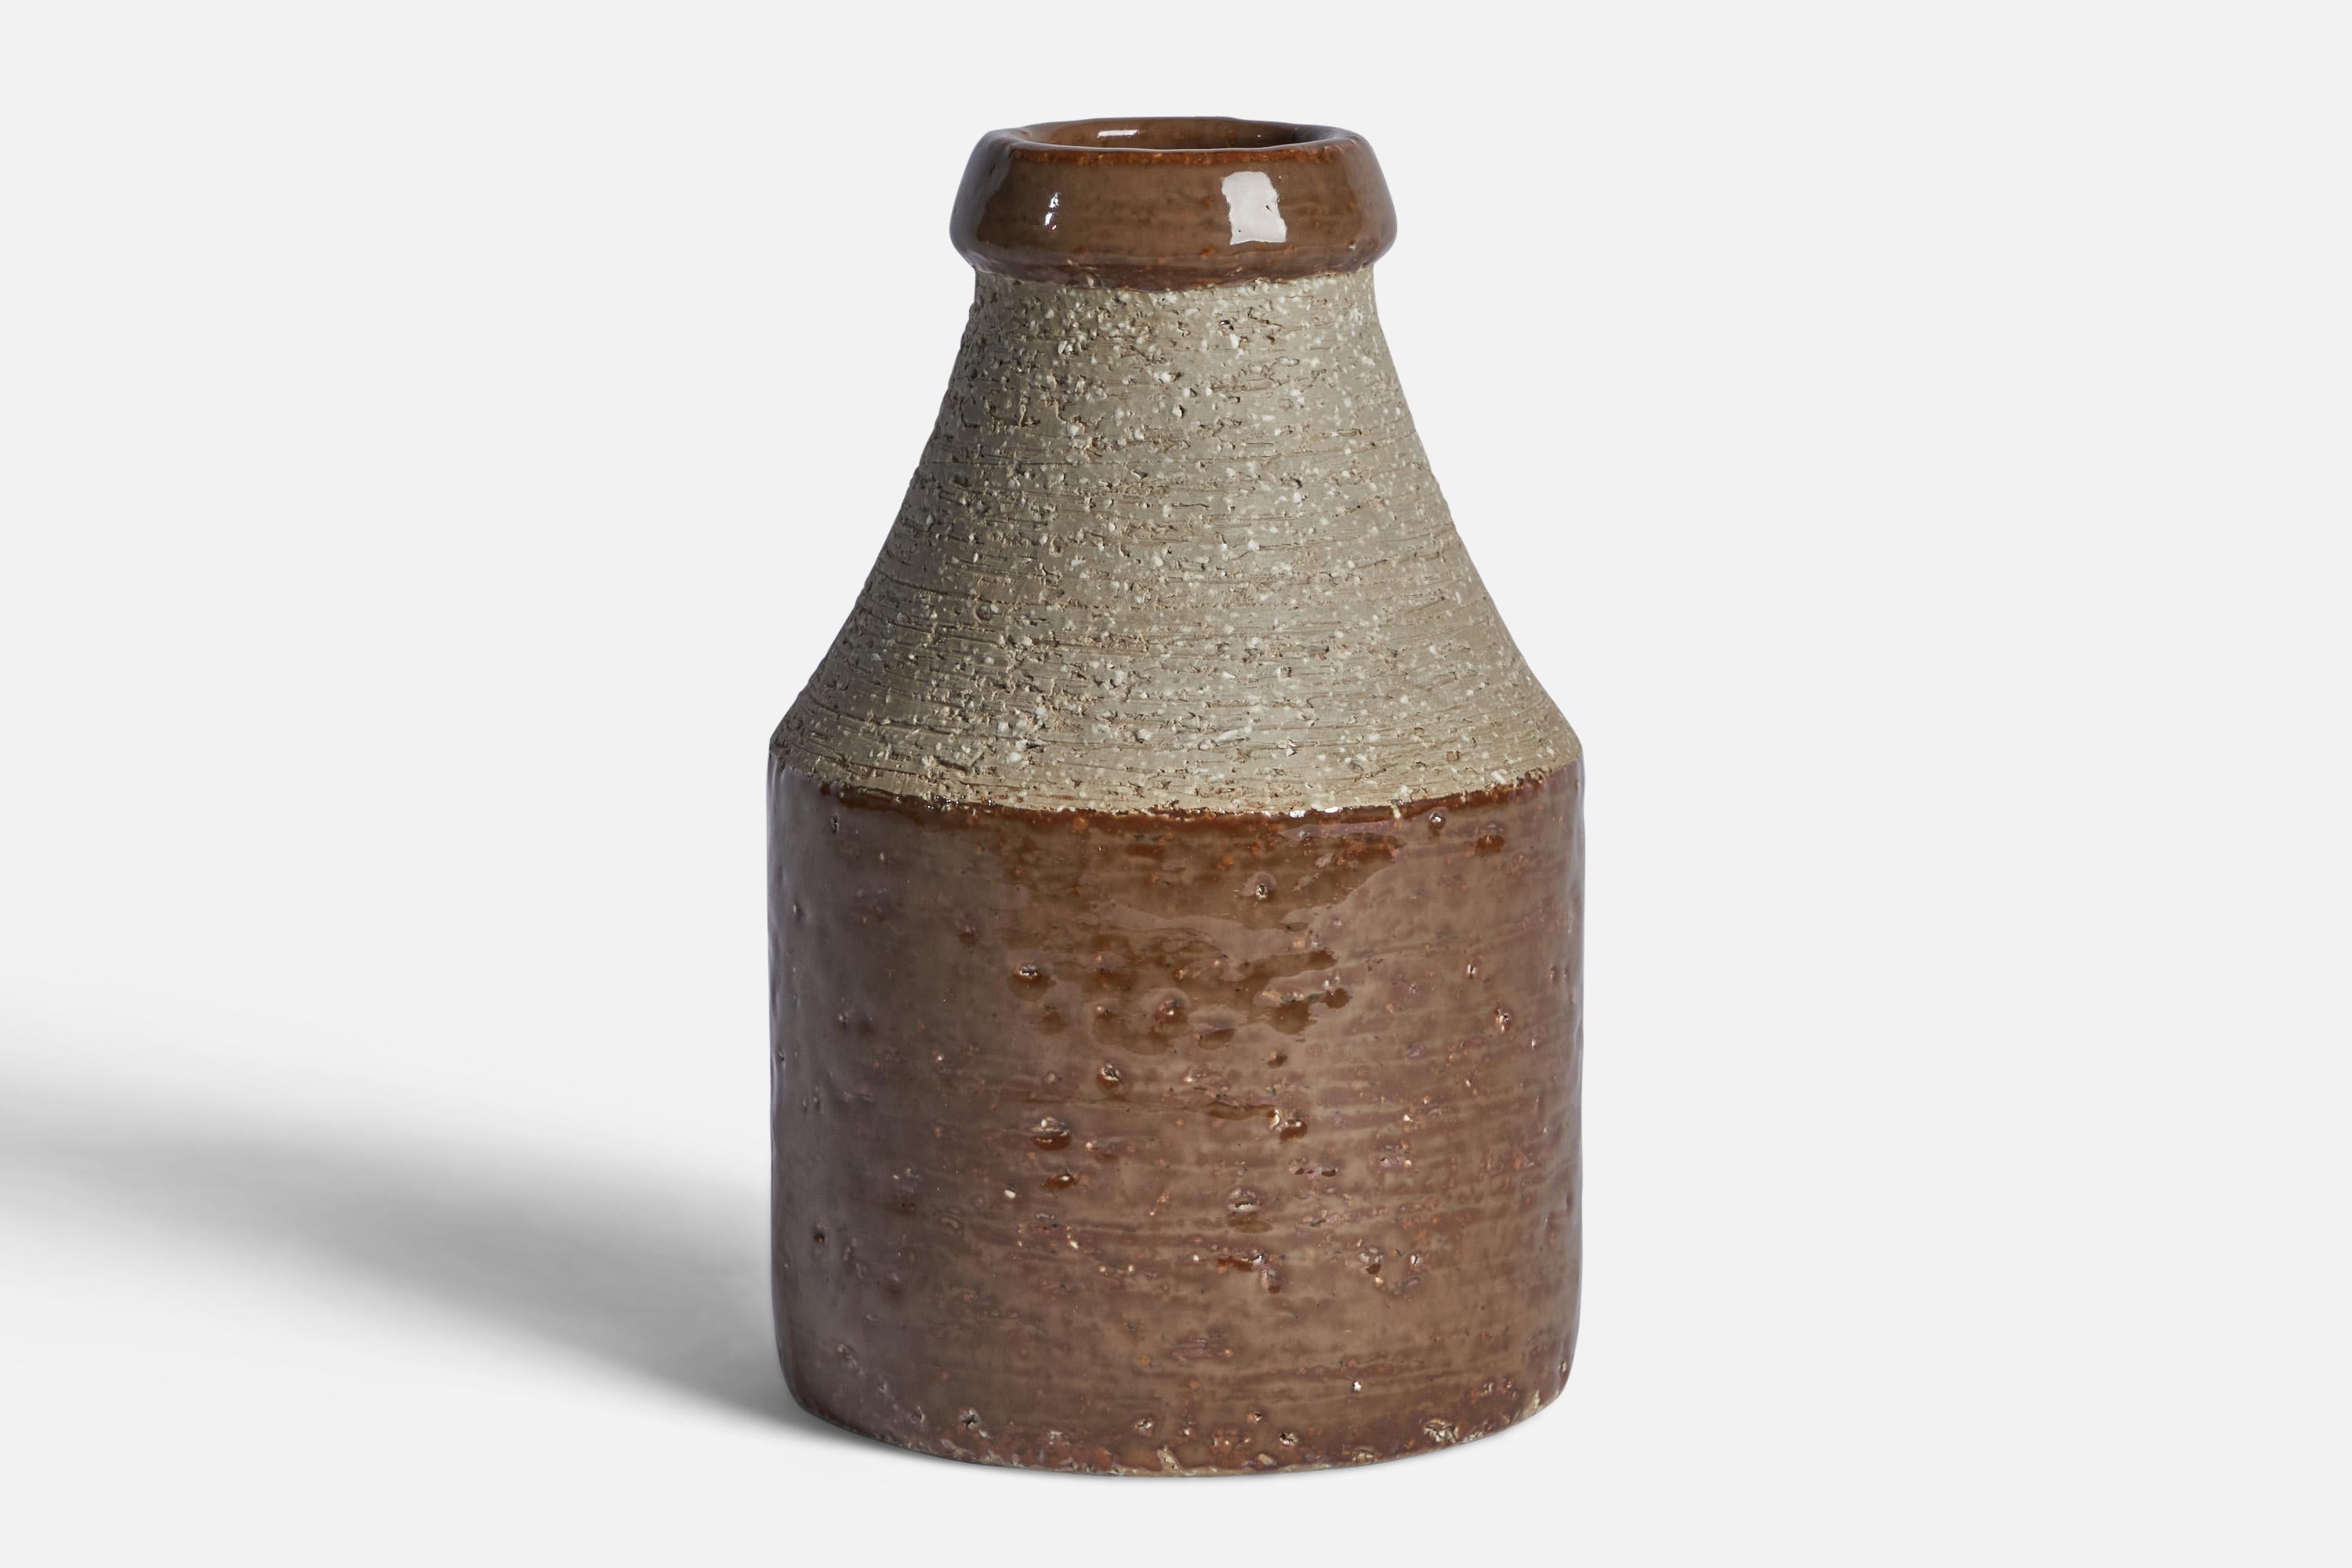 A grey and brown-glazed stoneware vase designed by Hertha Bengtsson and produced by Rörstrand, Sweden, 1950s.

“ R SWEDEN” inscription on bottom